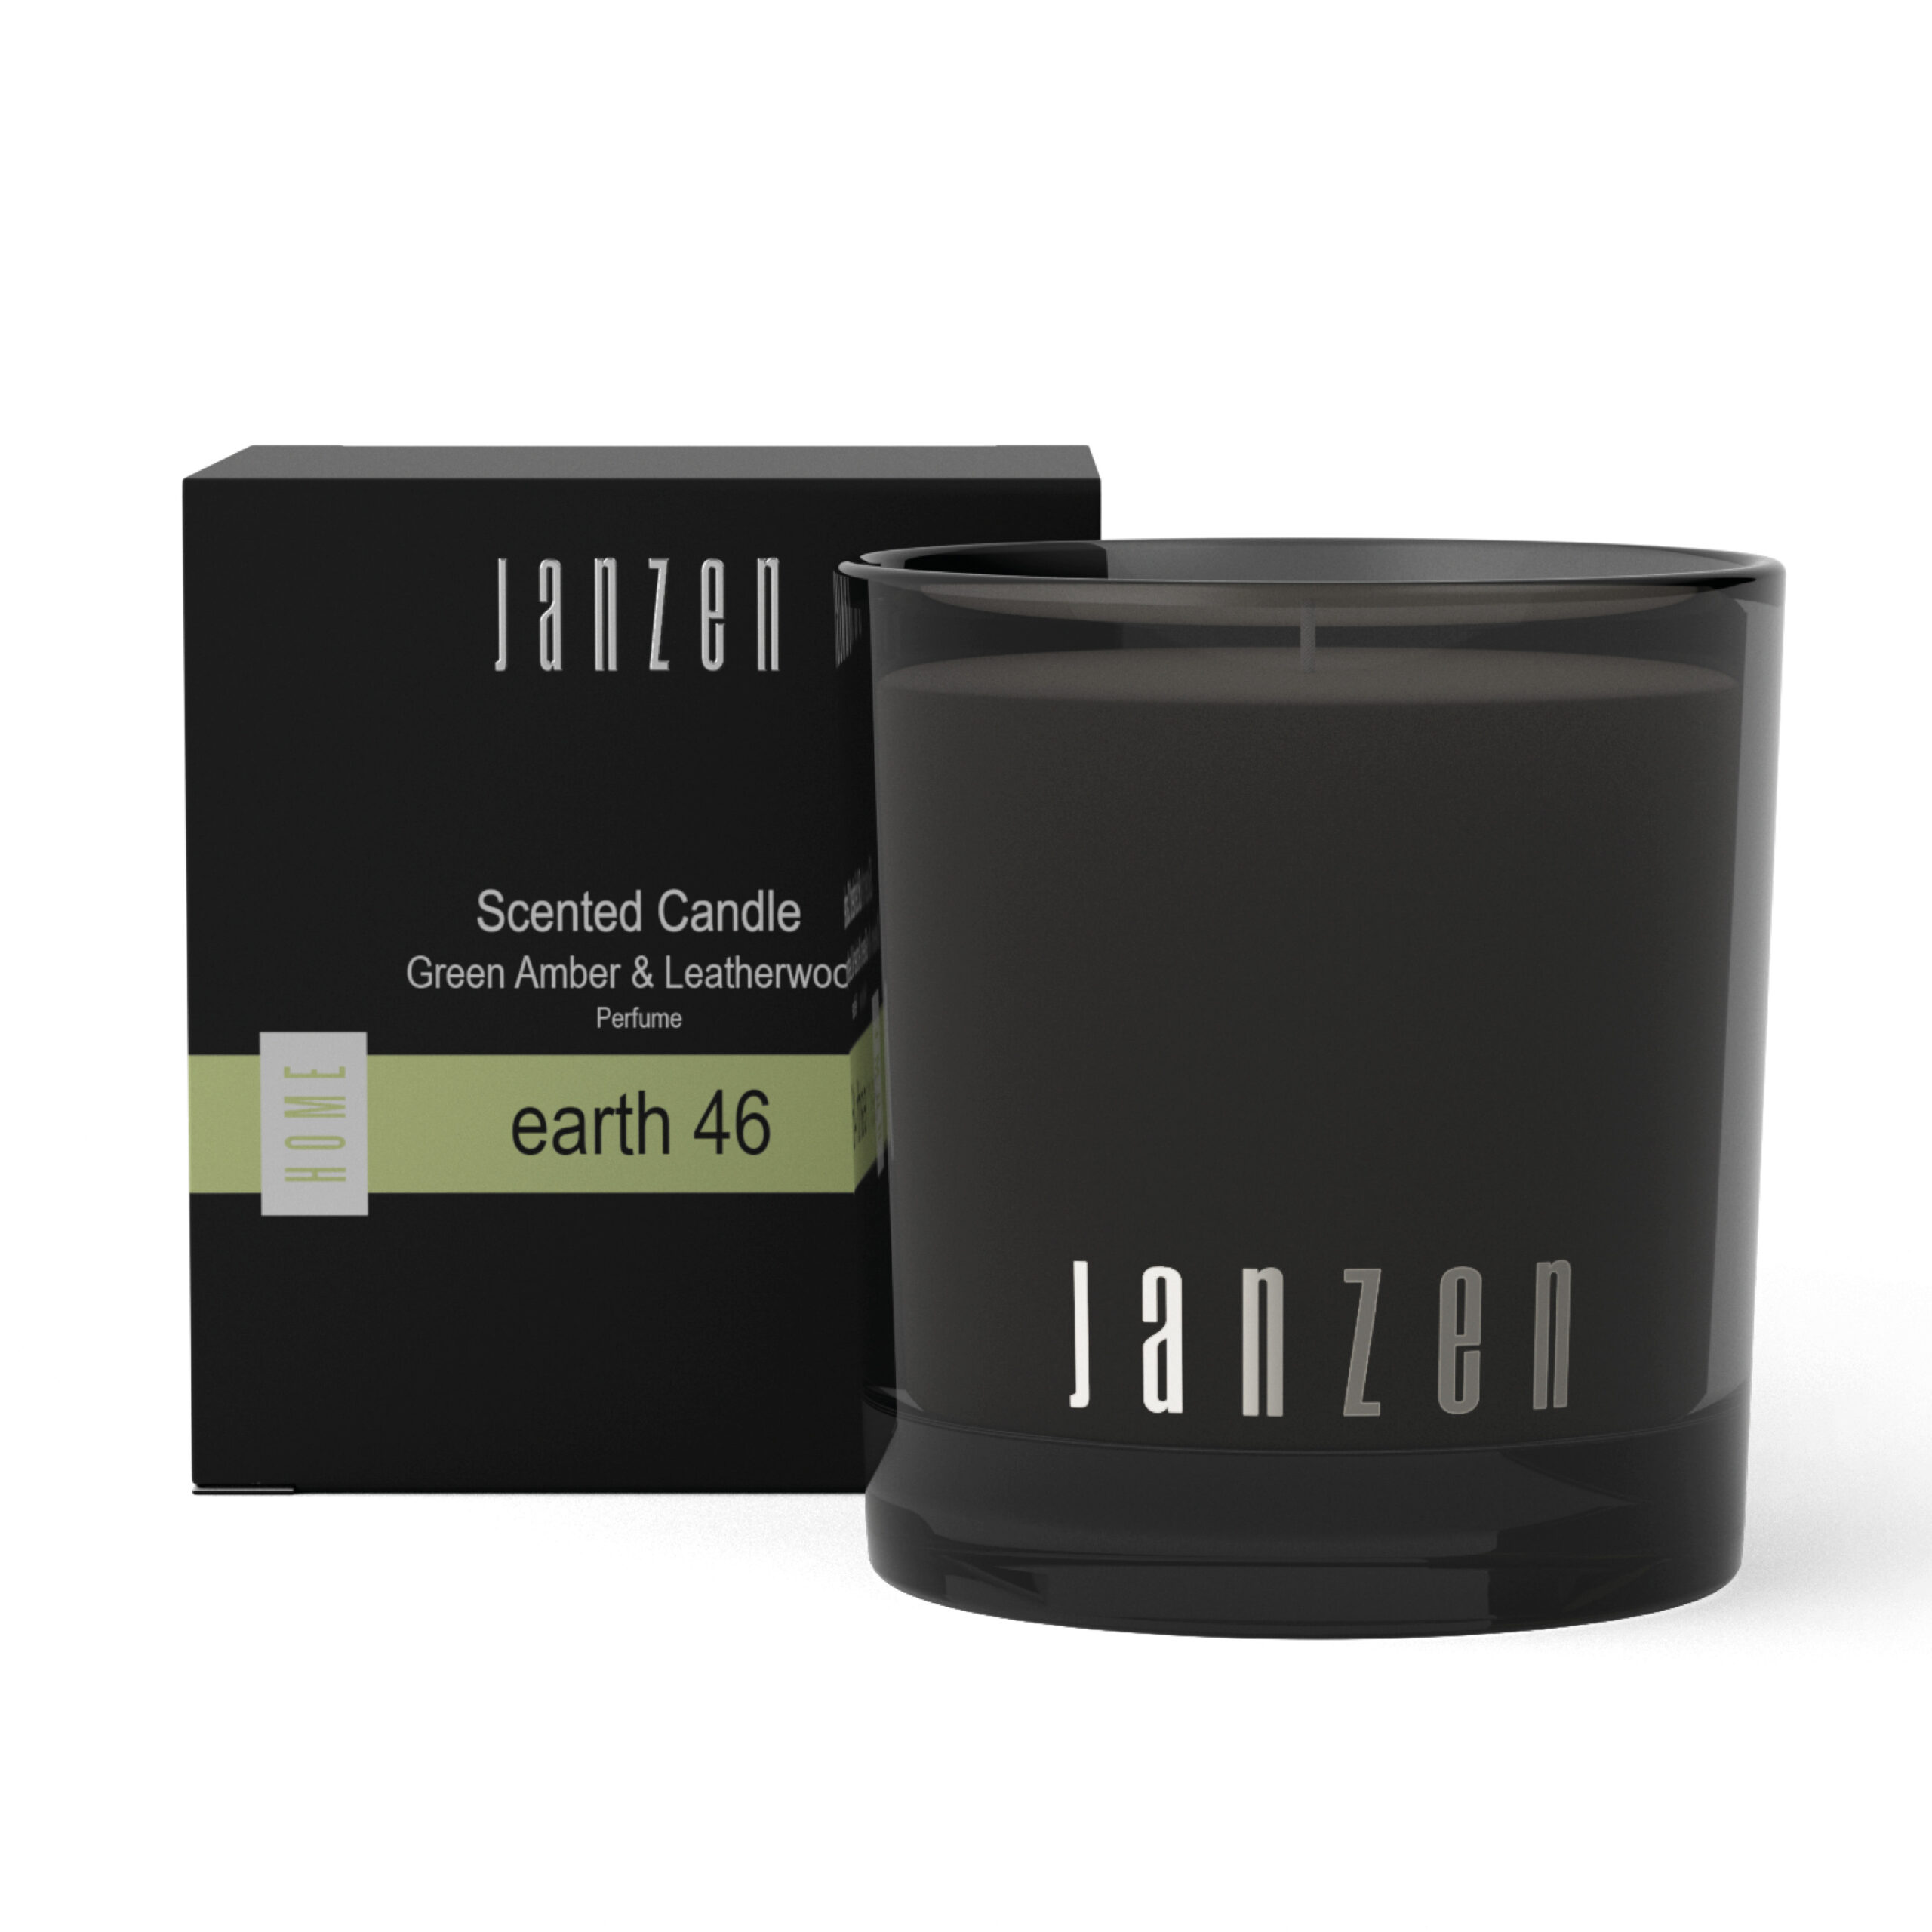 Janzen Scented Candle Earth 46 210 Gram